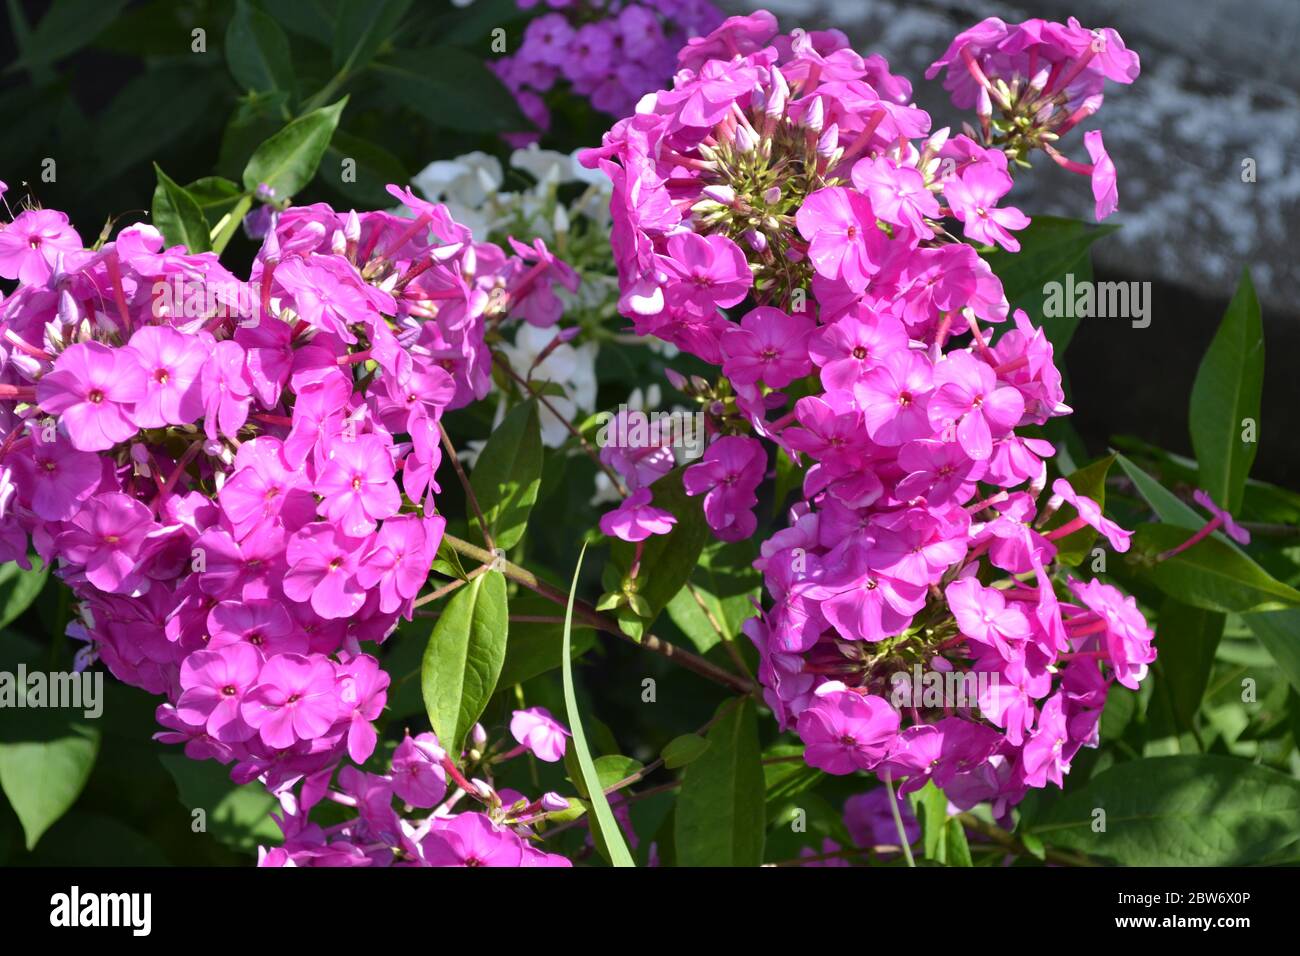 Green. Phlox flower. Perennial herbaceous plant. High branches. Purple flowers Stock Photo